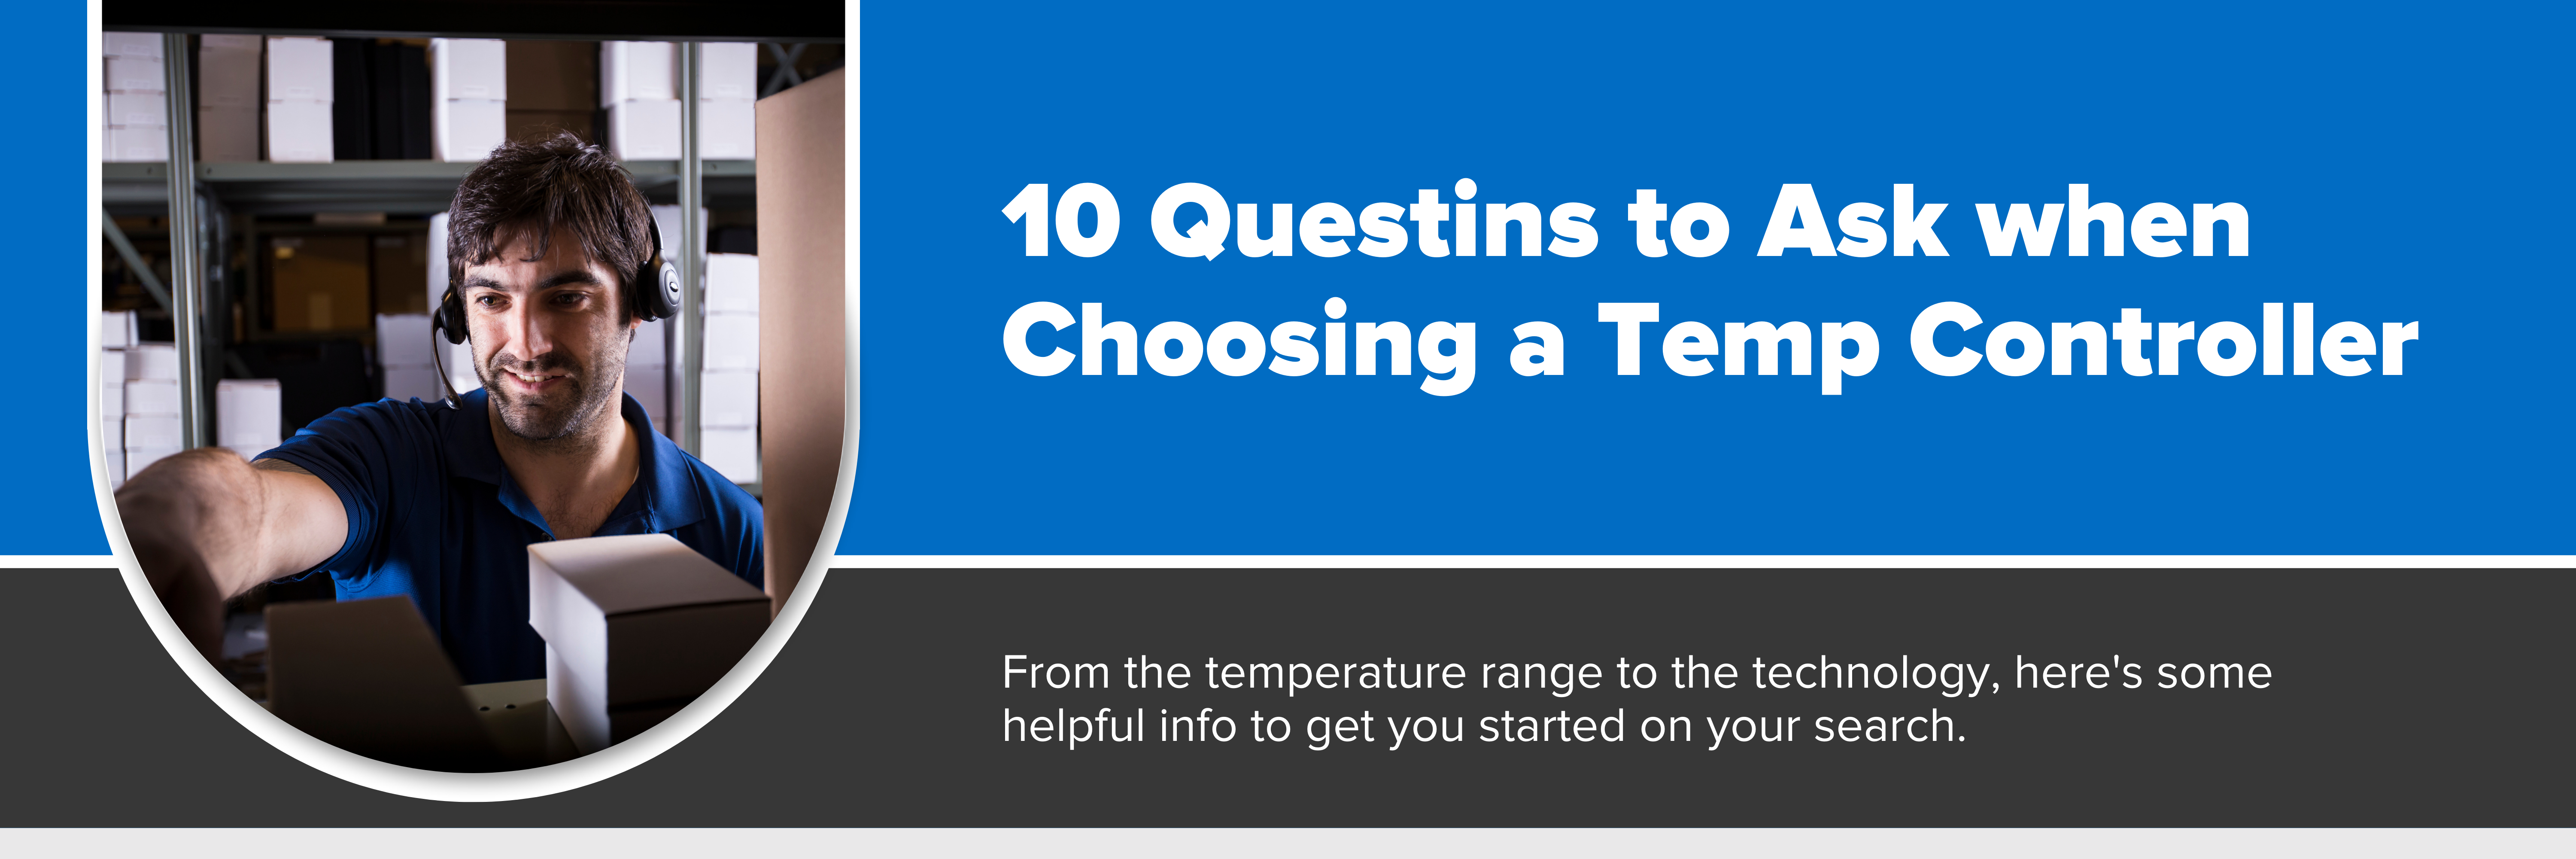 Header image with text "10 Questions to Ask when Choosing a Temperature Controller